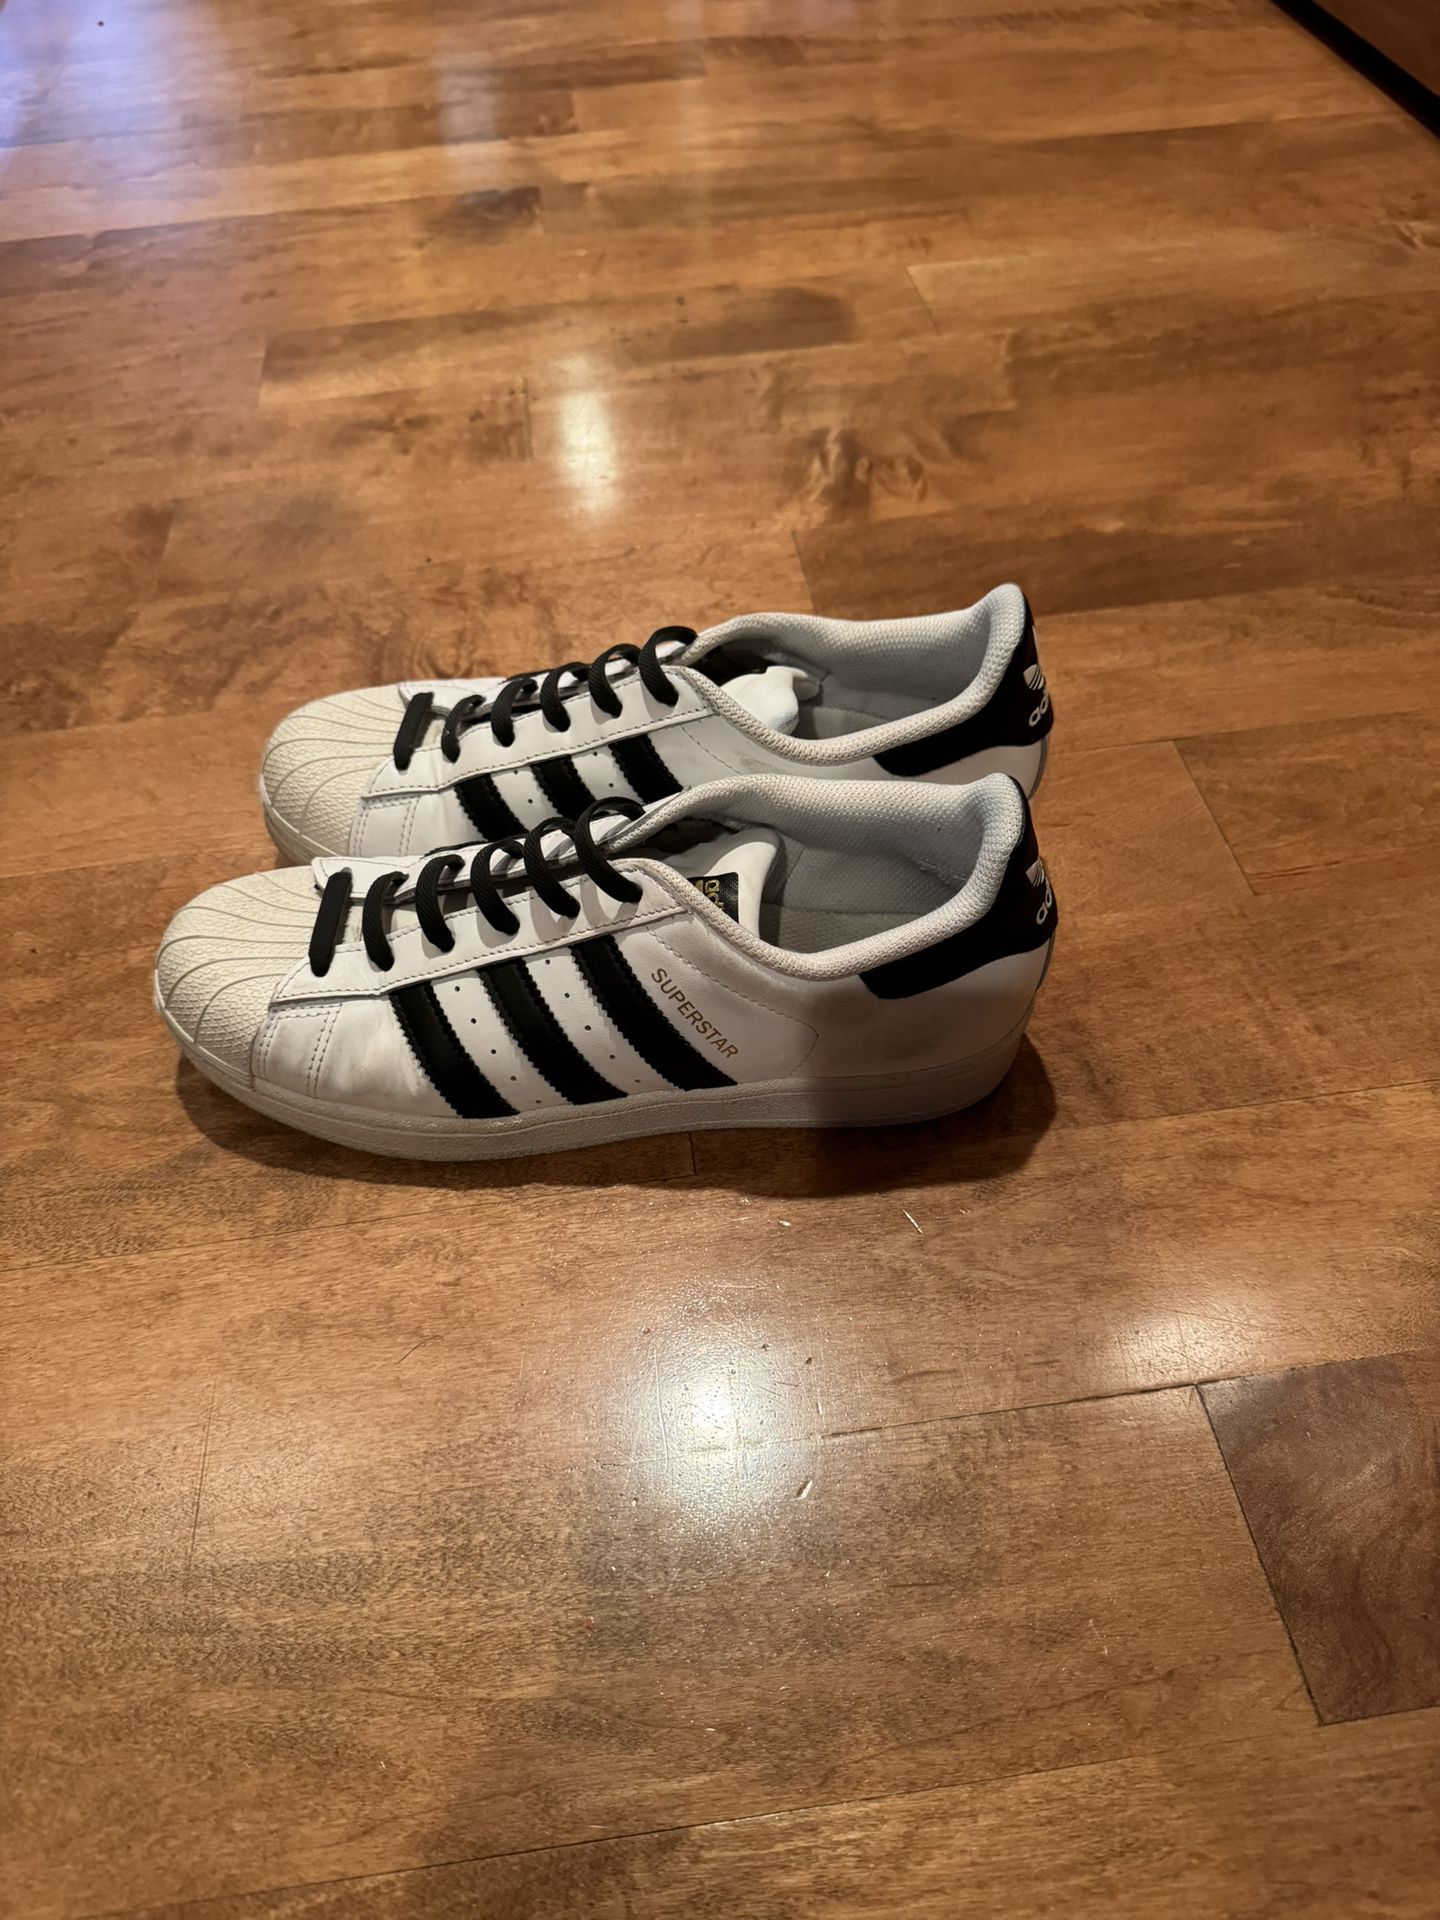 Women’s Adidas Superstar Sneakers Shipping Available